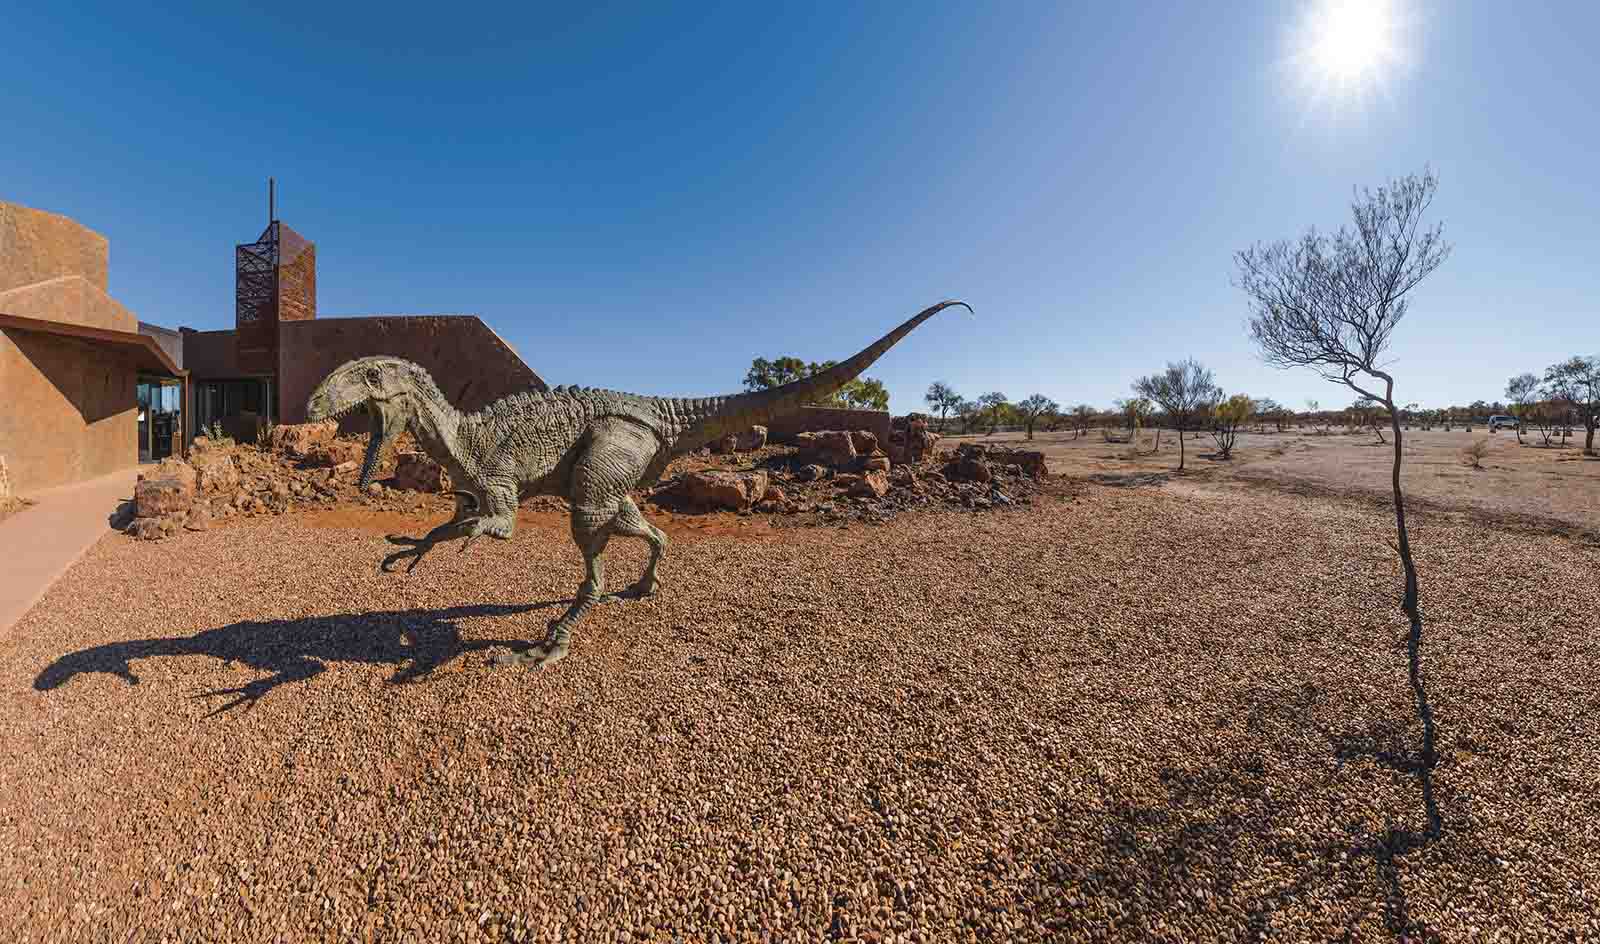 Australian Age of Dinosaurs Winton | Road trip explores Queensland's outback